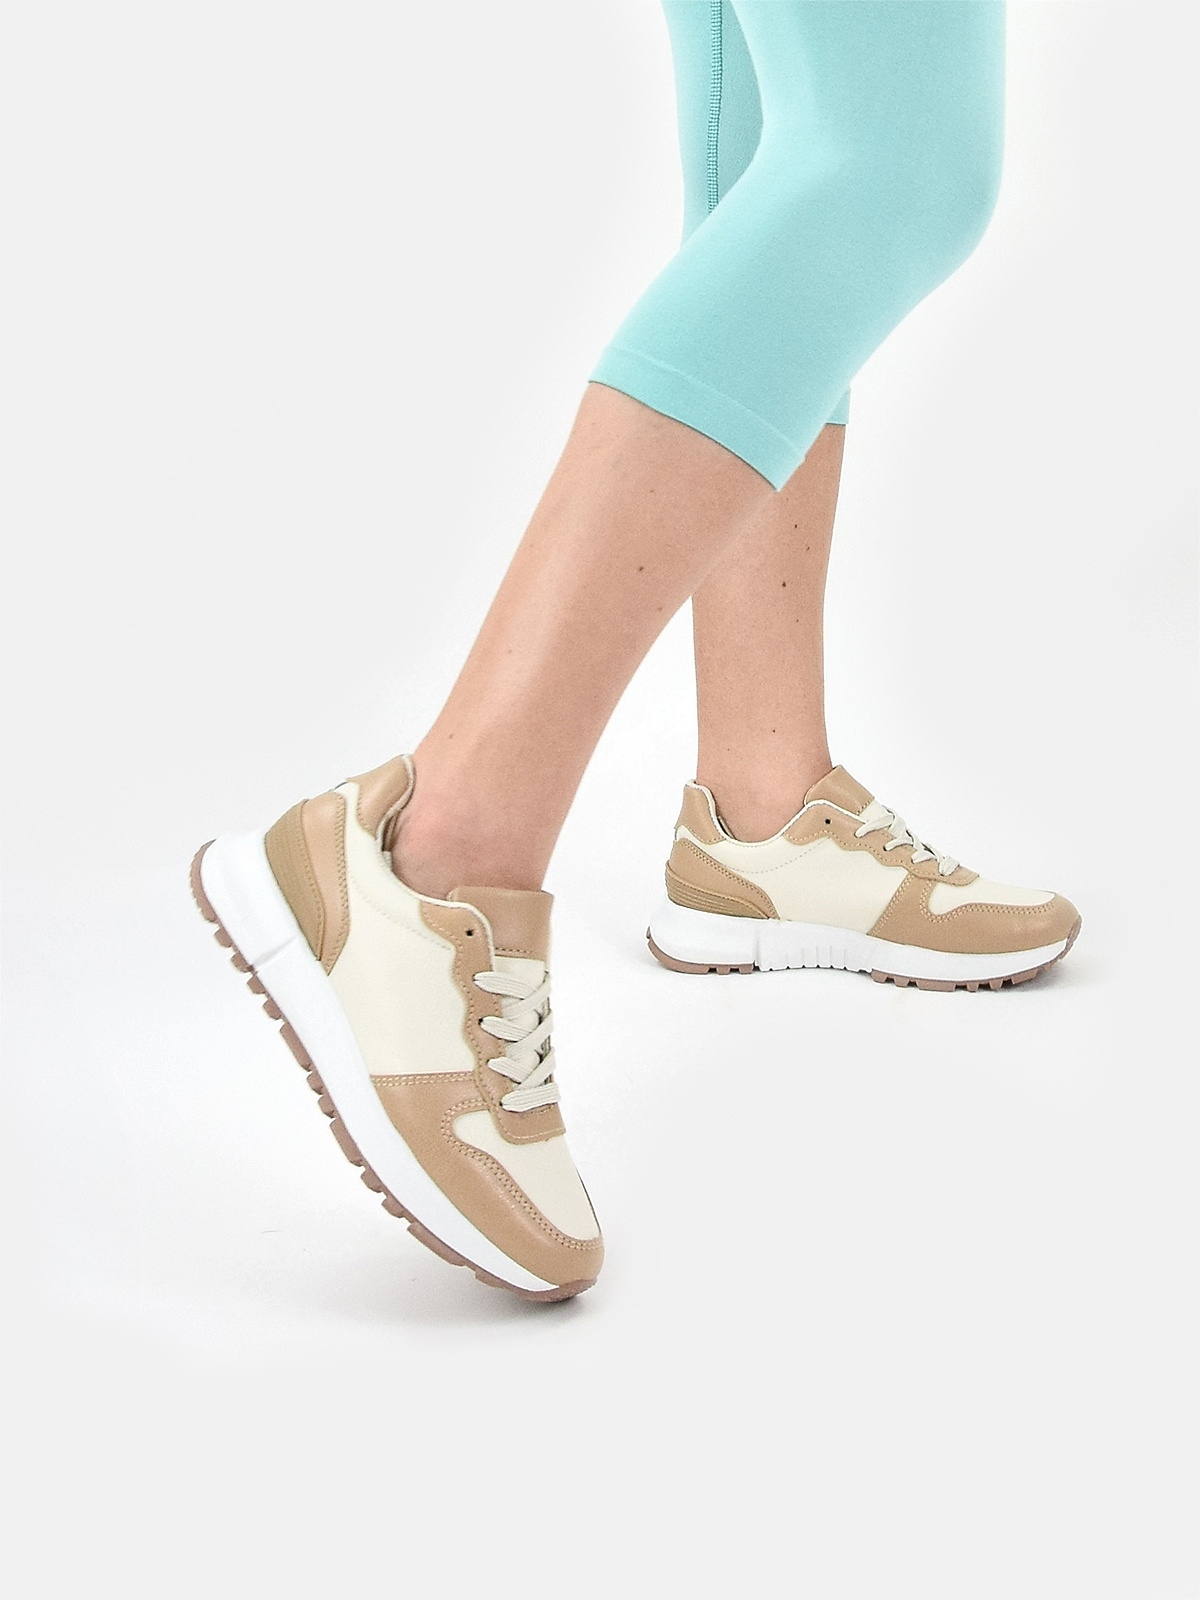 Lace up trainers with white details in neutral